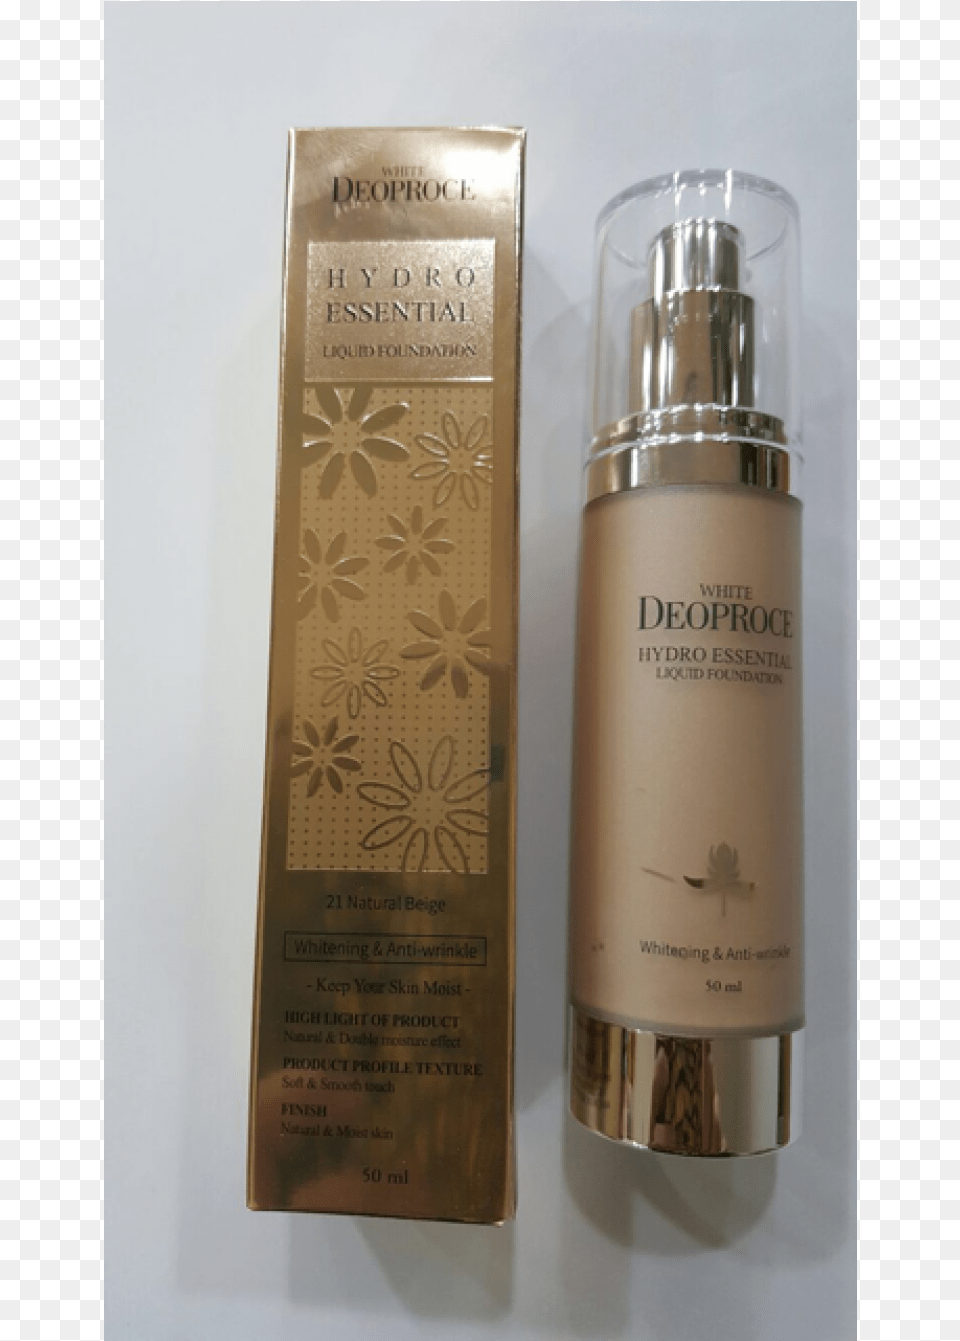 Deoproce Hydro Essential Liquid Foundation, Bottle, Shaker, Cosmetics Free Transparent Png